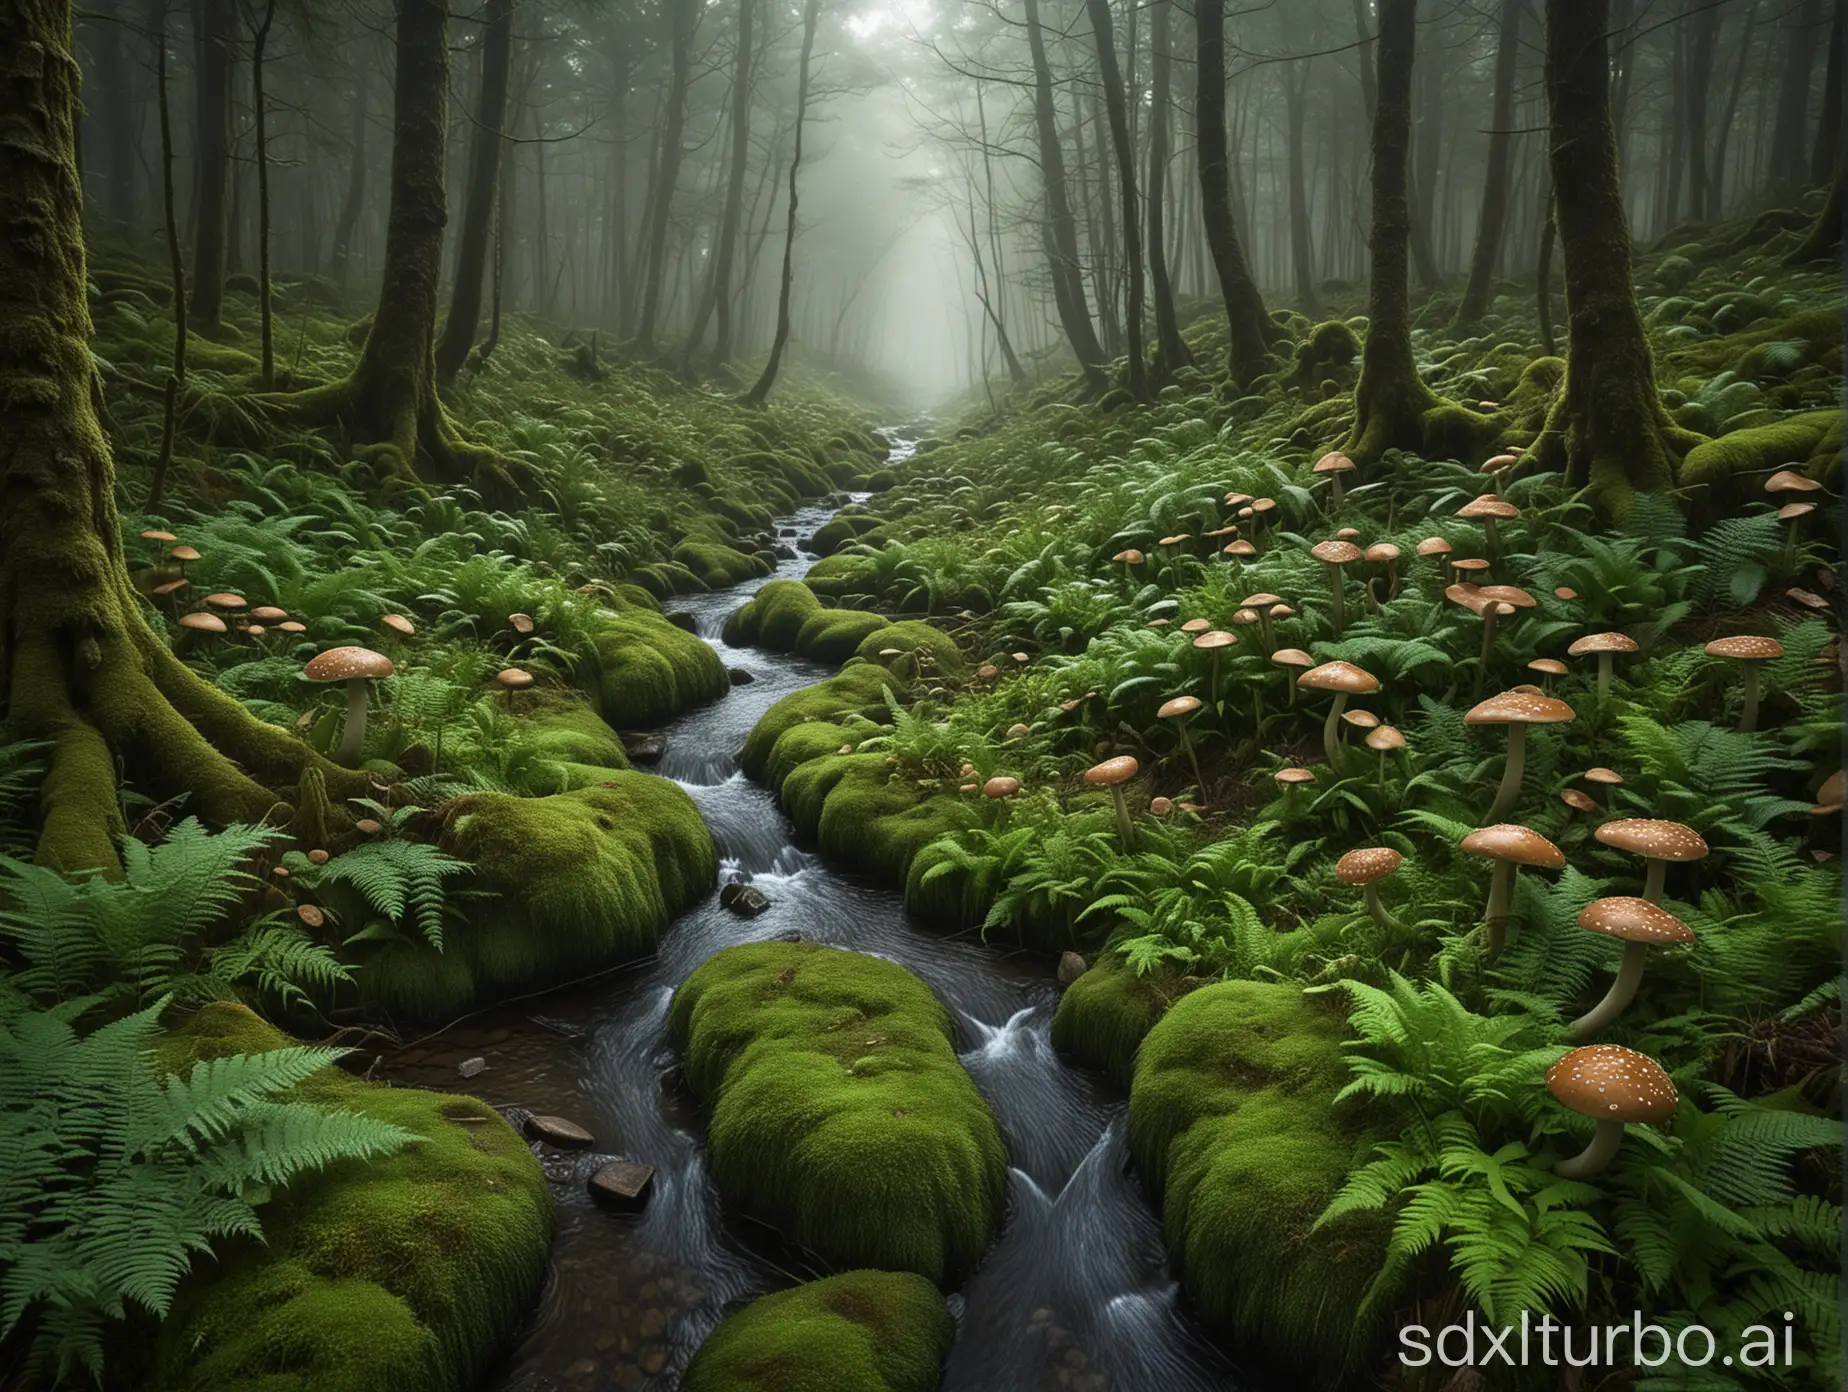 A mesmerizing dark fantasy scene of a serene forest, where mushrooms glow mysteriously amidst the thick green moss and ferns. The g

round is blanketed in a soft mist, creating an ethereal ambiance. A gentle, meandering stream gracefully weaves through the scene. The overall atmosphere of the image exudes tranquility, harmony, and peace, transporting the viewer into a world of enchantment and wonder., dark fantasy